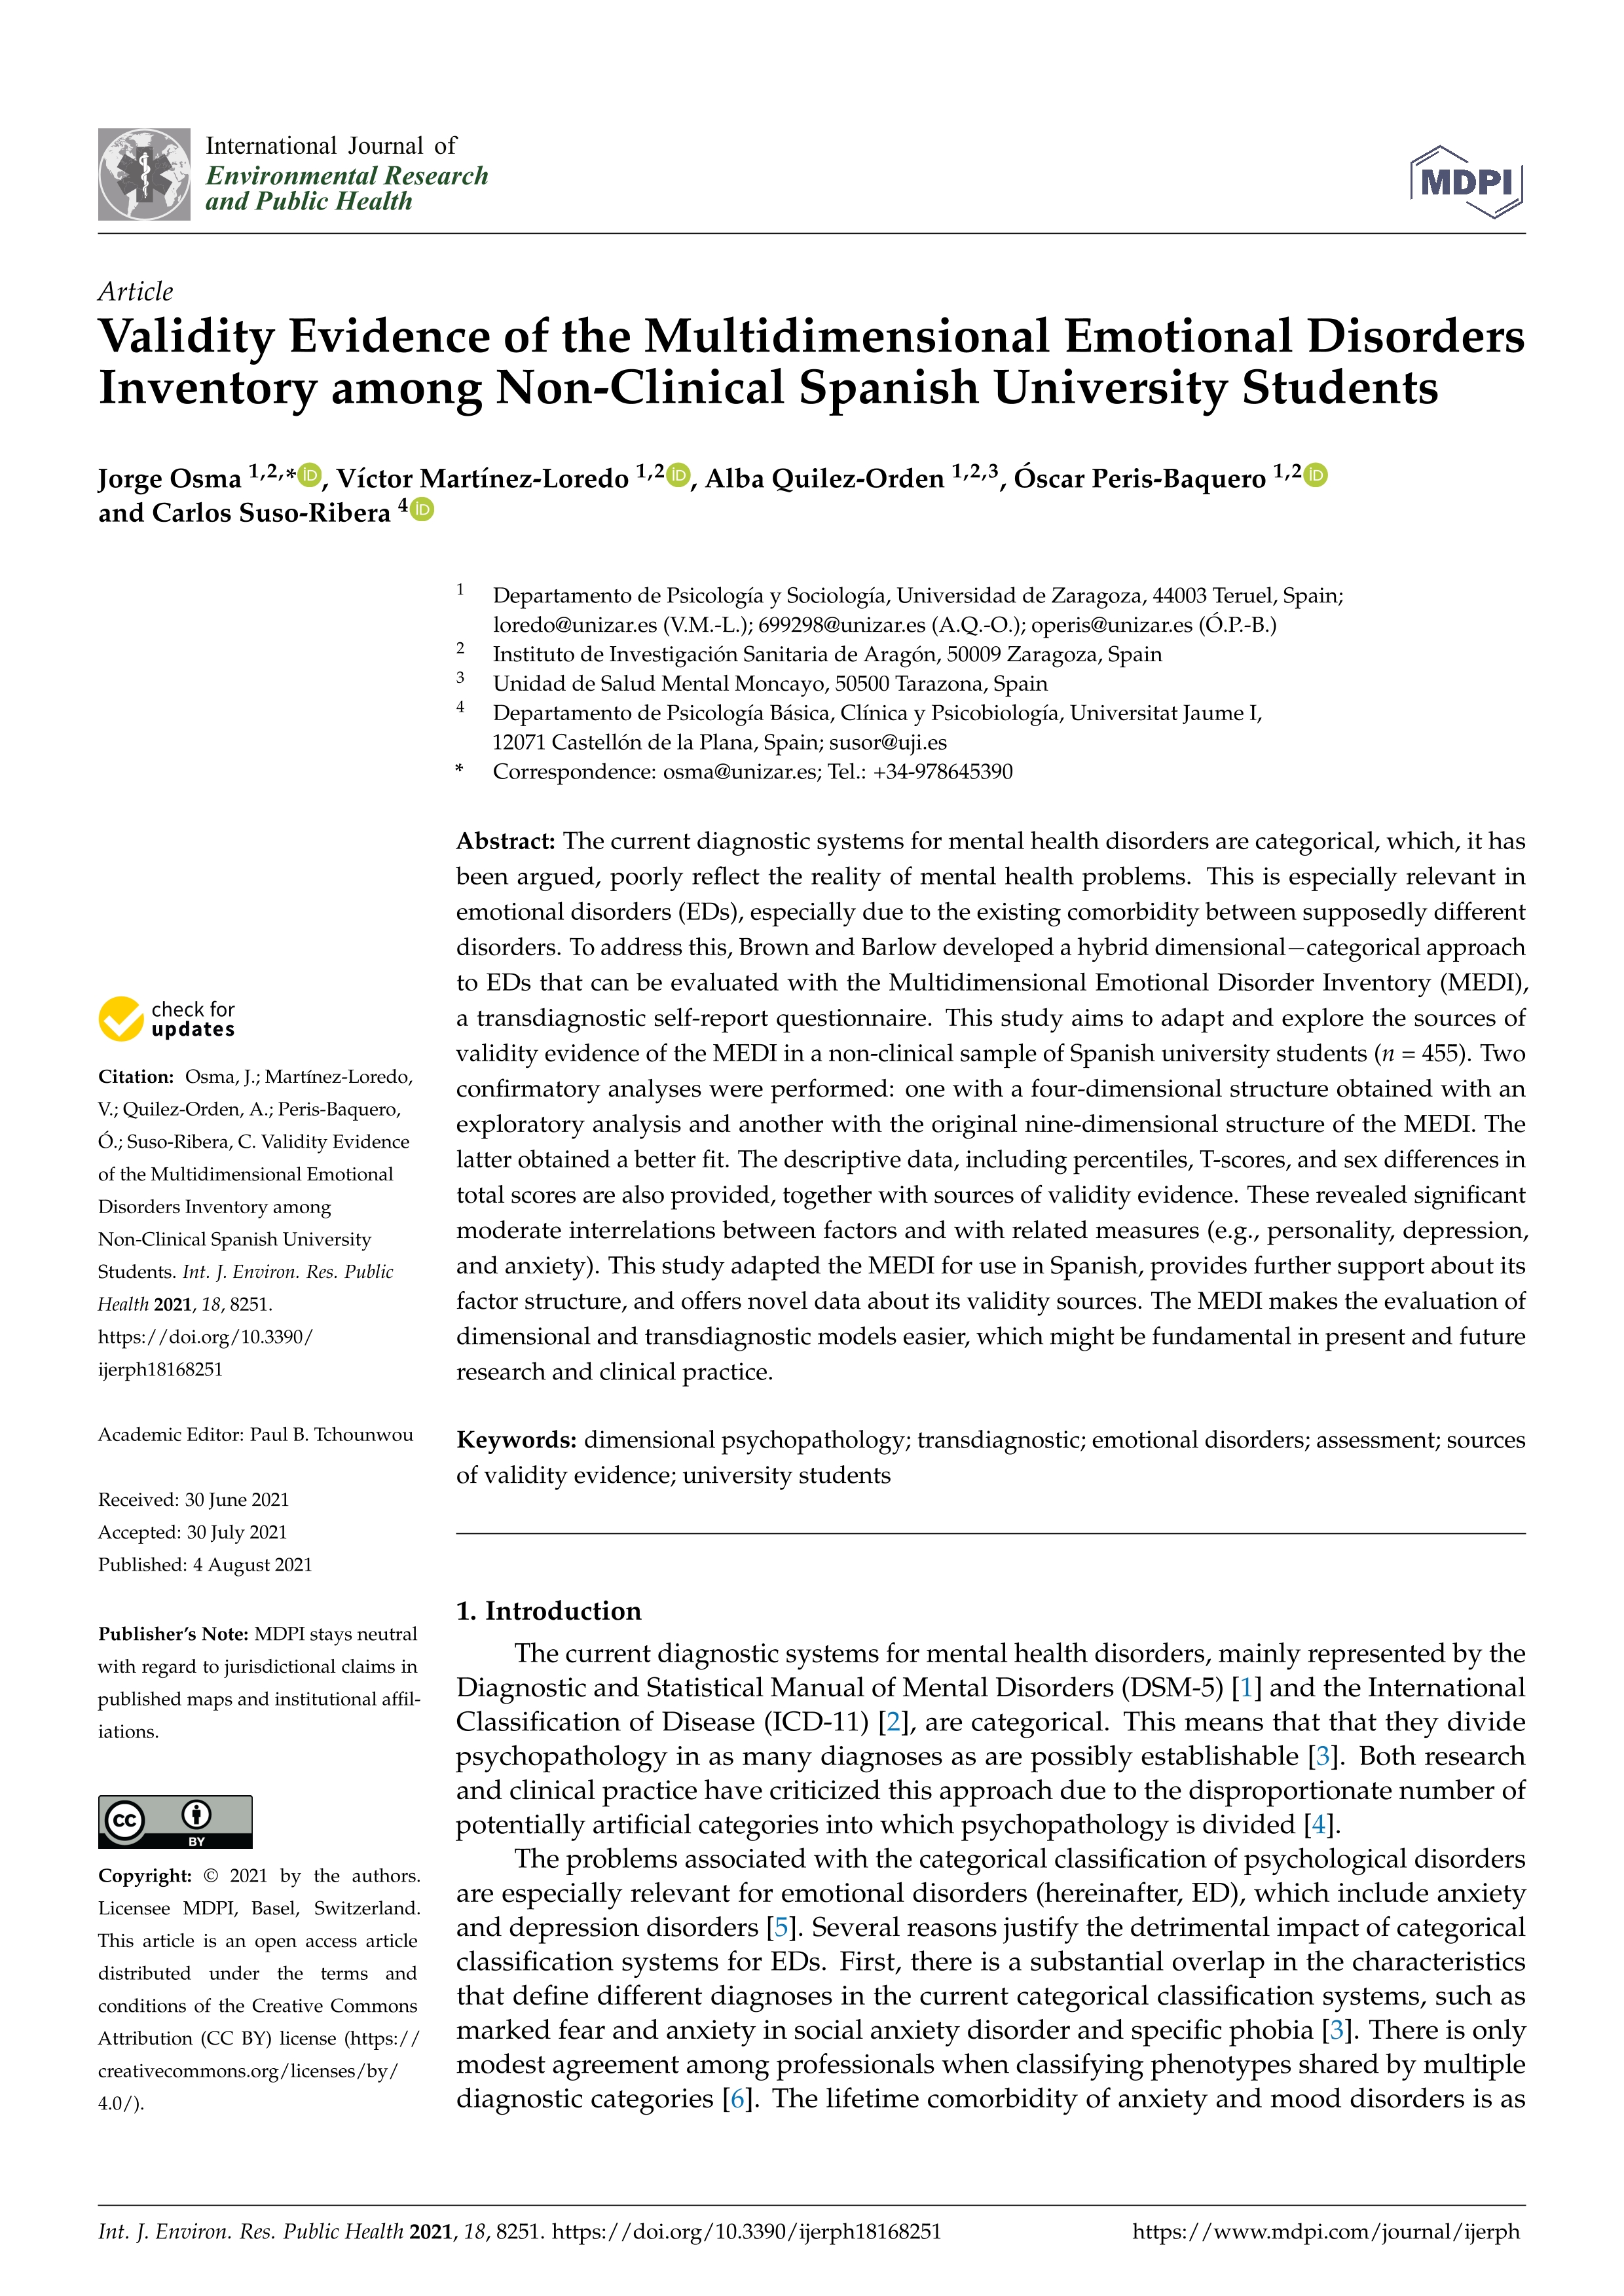 Validity evidence of the multidimensional emotional disorders inventory among non-clinical spanish university students